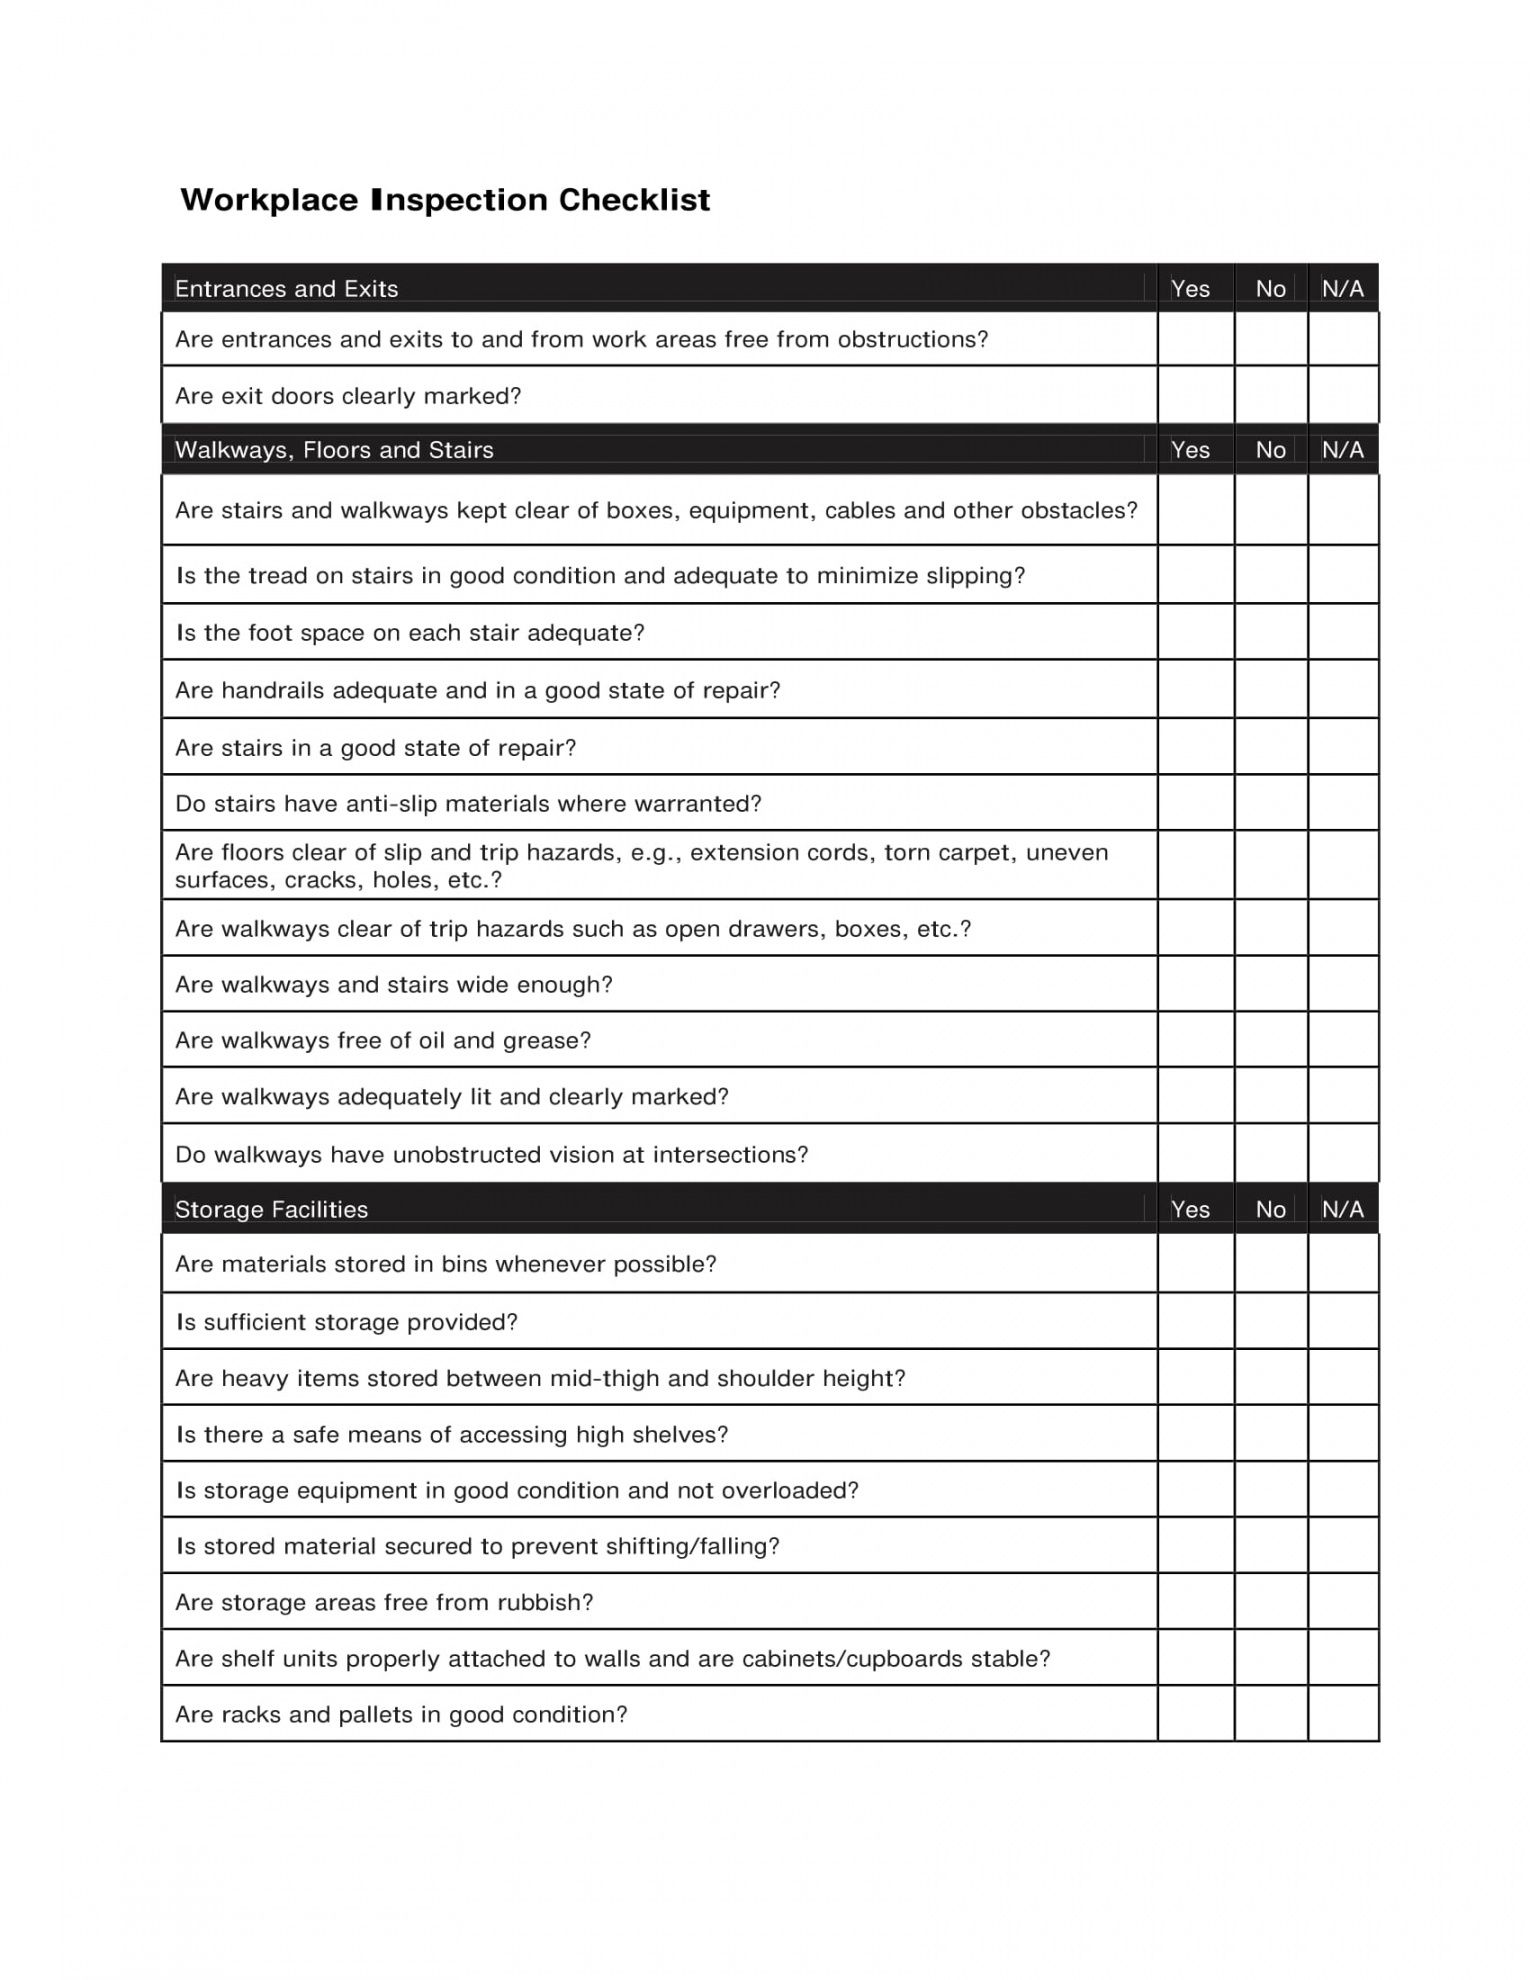 Workplace Safety Inspection Checklist Template Excel Sample Excel